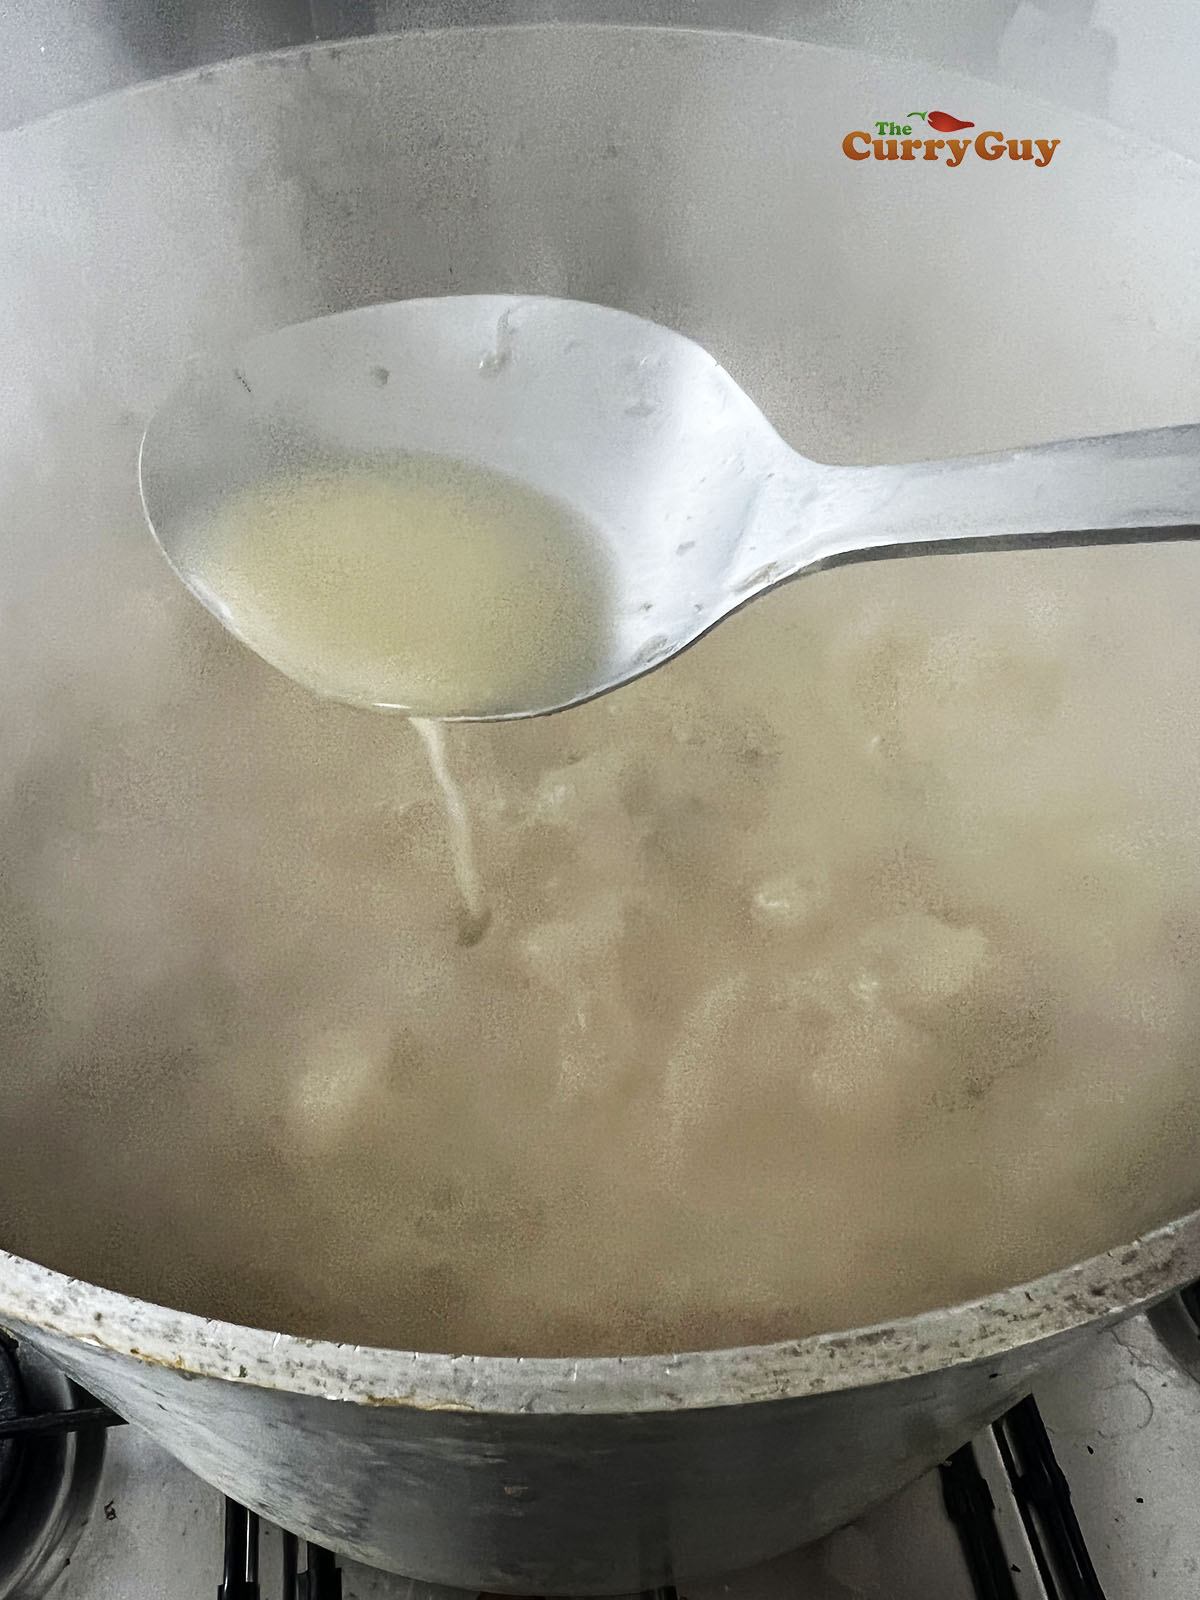 Tonkotsu broth after 6 hours of boiling